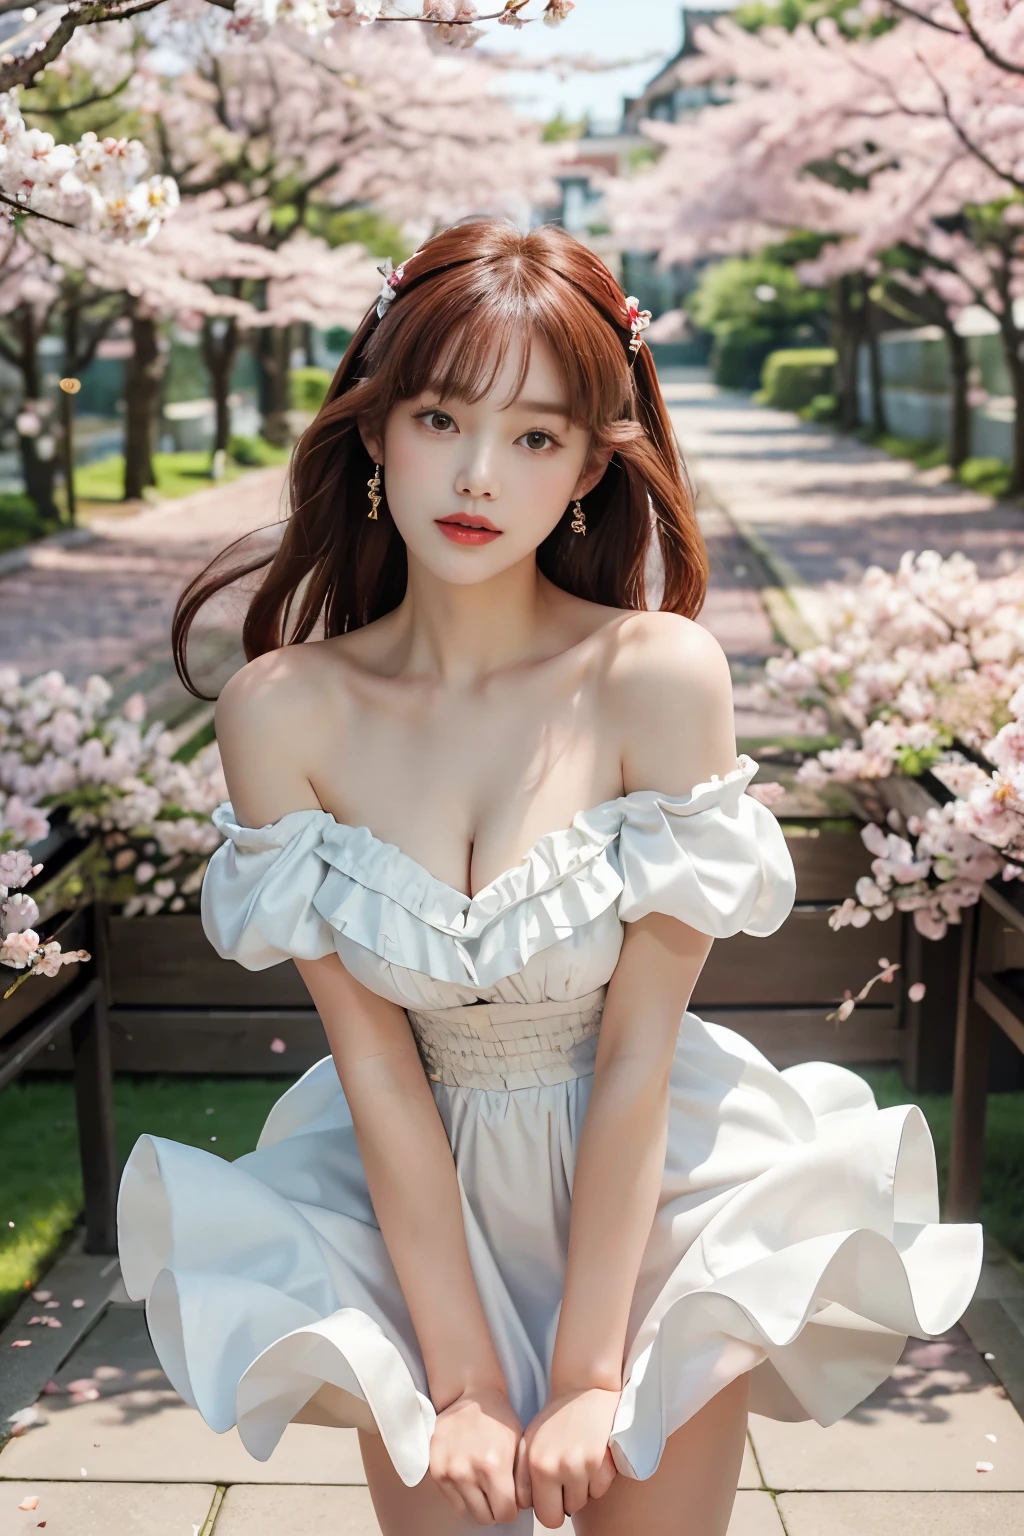 masterpiece、quality、Very detailed、Marilyn Tagg ， Pay attention to more than the thighs，Clear Face，（Best quality at best）， beautiful girl：1.5、(Fluffy red off-shoulder dress style)，Long flowing hair，Cherry tree、Cherry blossom petals in full bloom